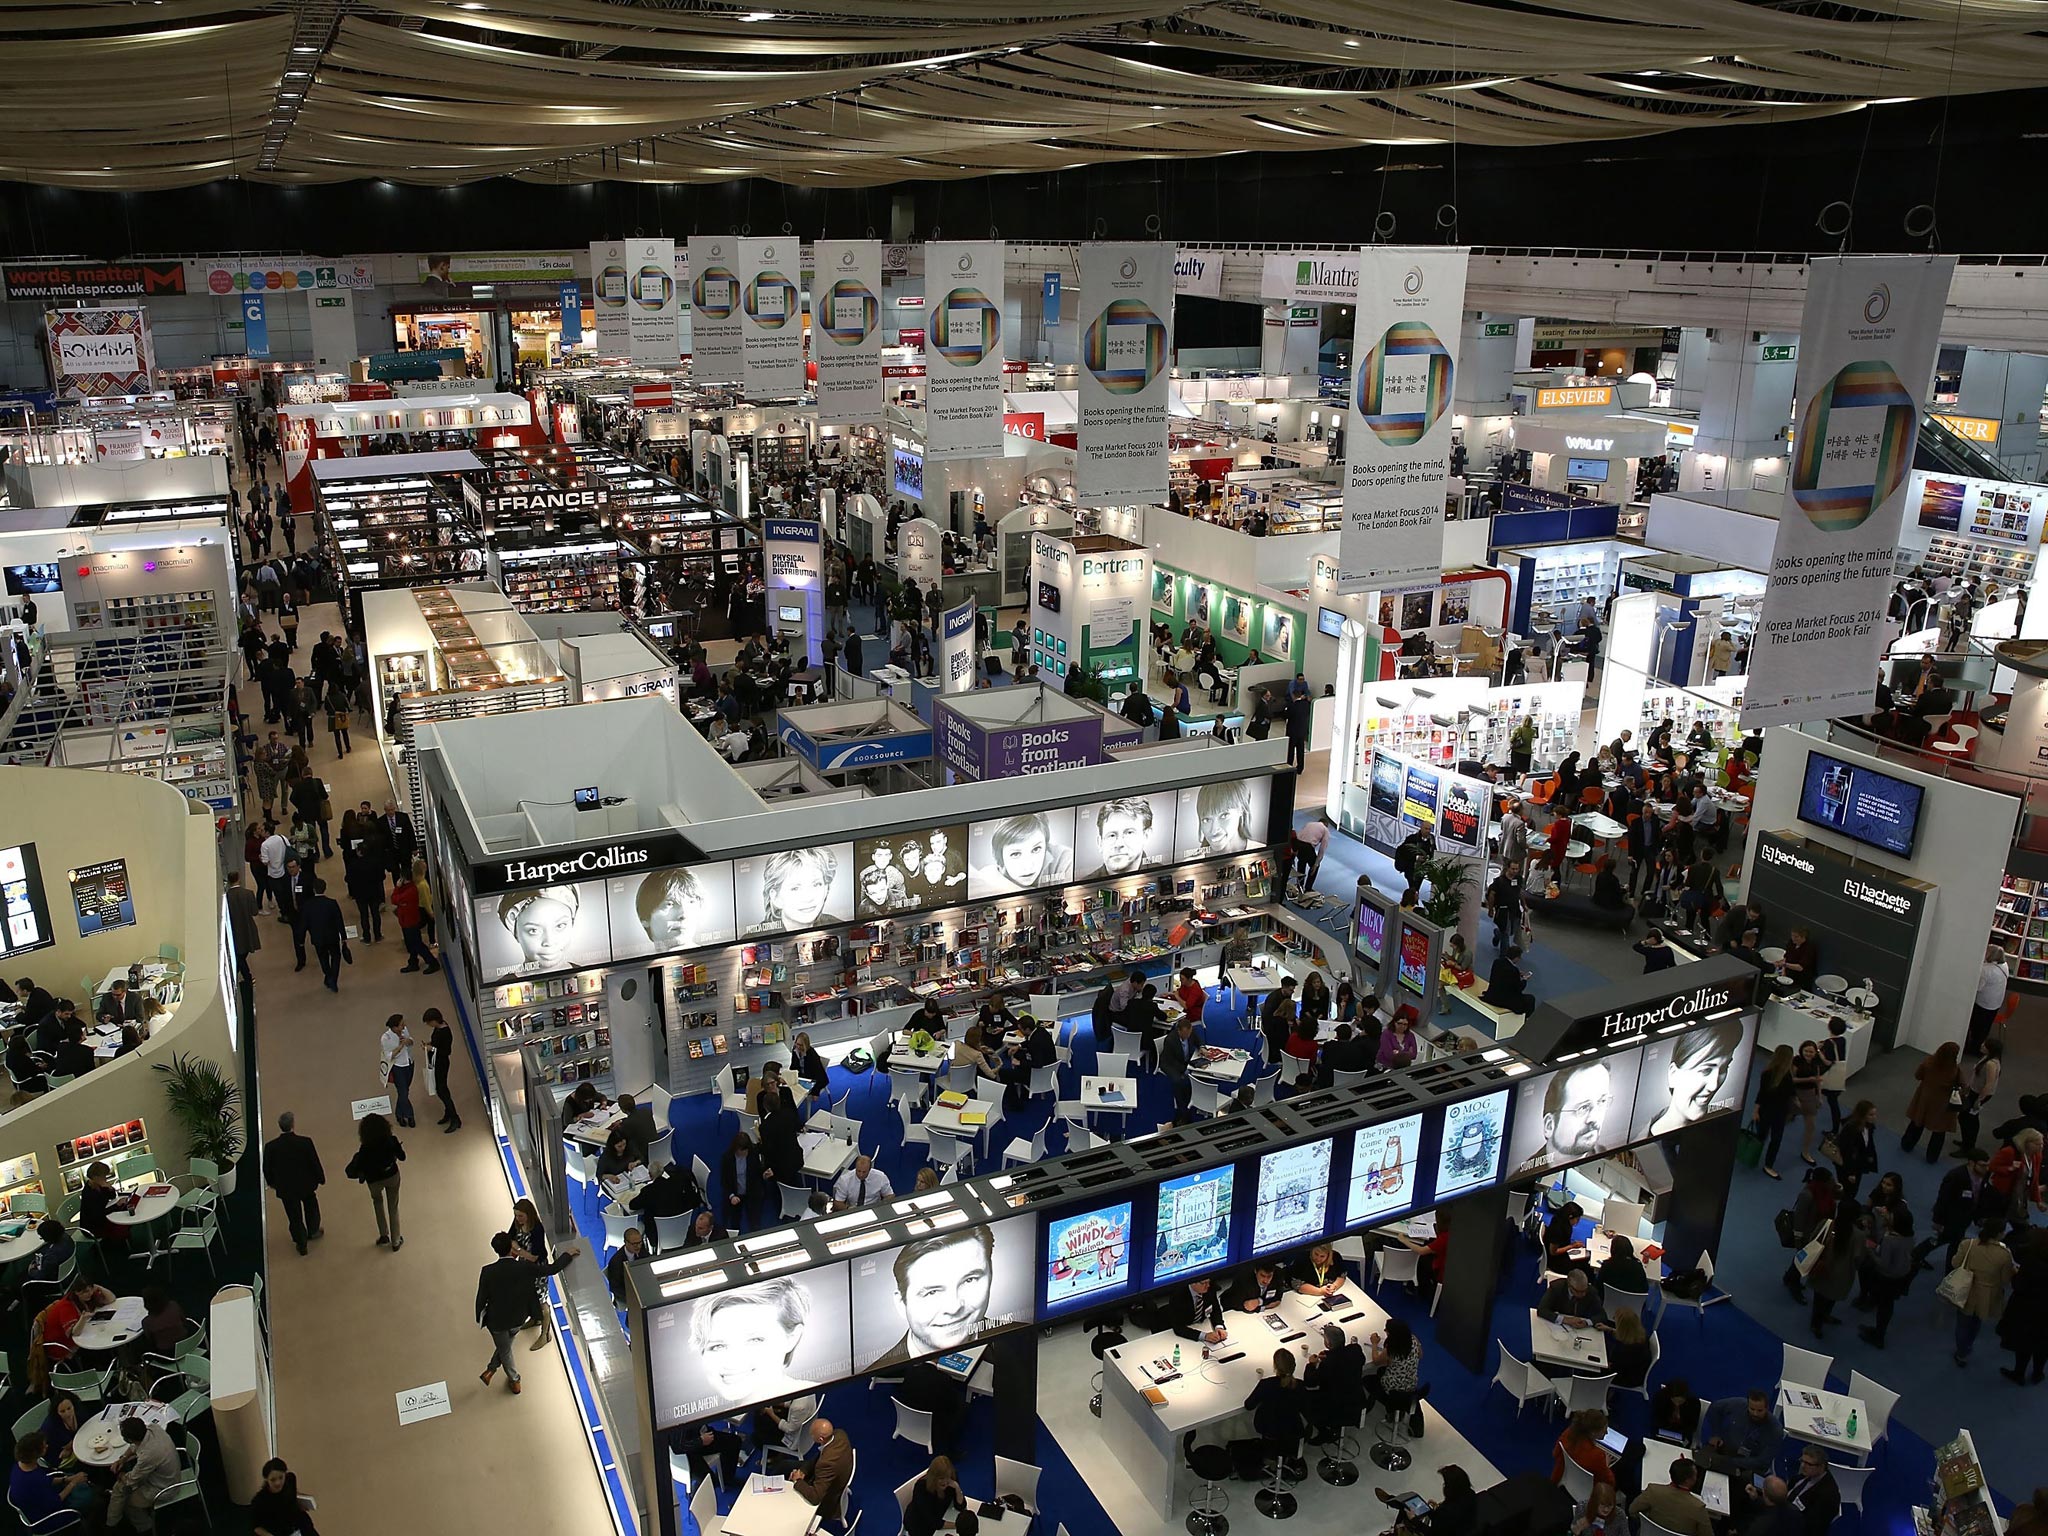 The London Book Fair took place this week in Earls Court, a showcase for the UK’s £3bn-a-year books business